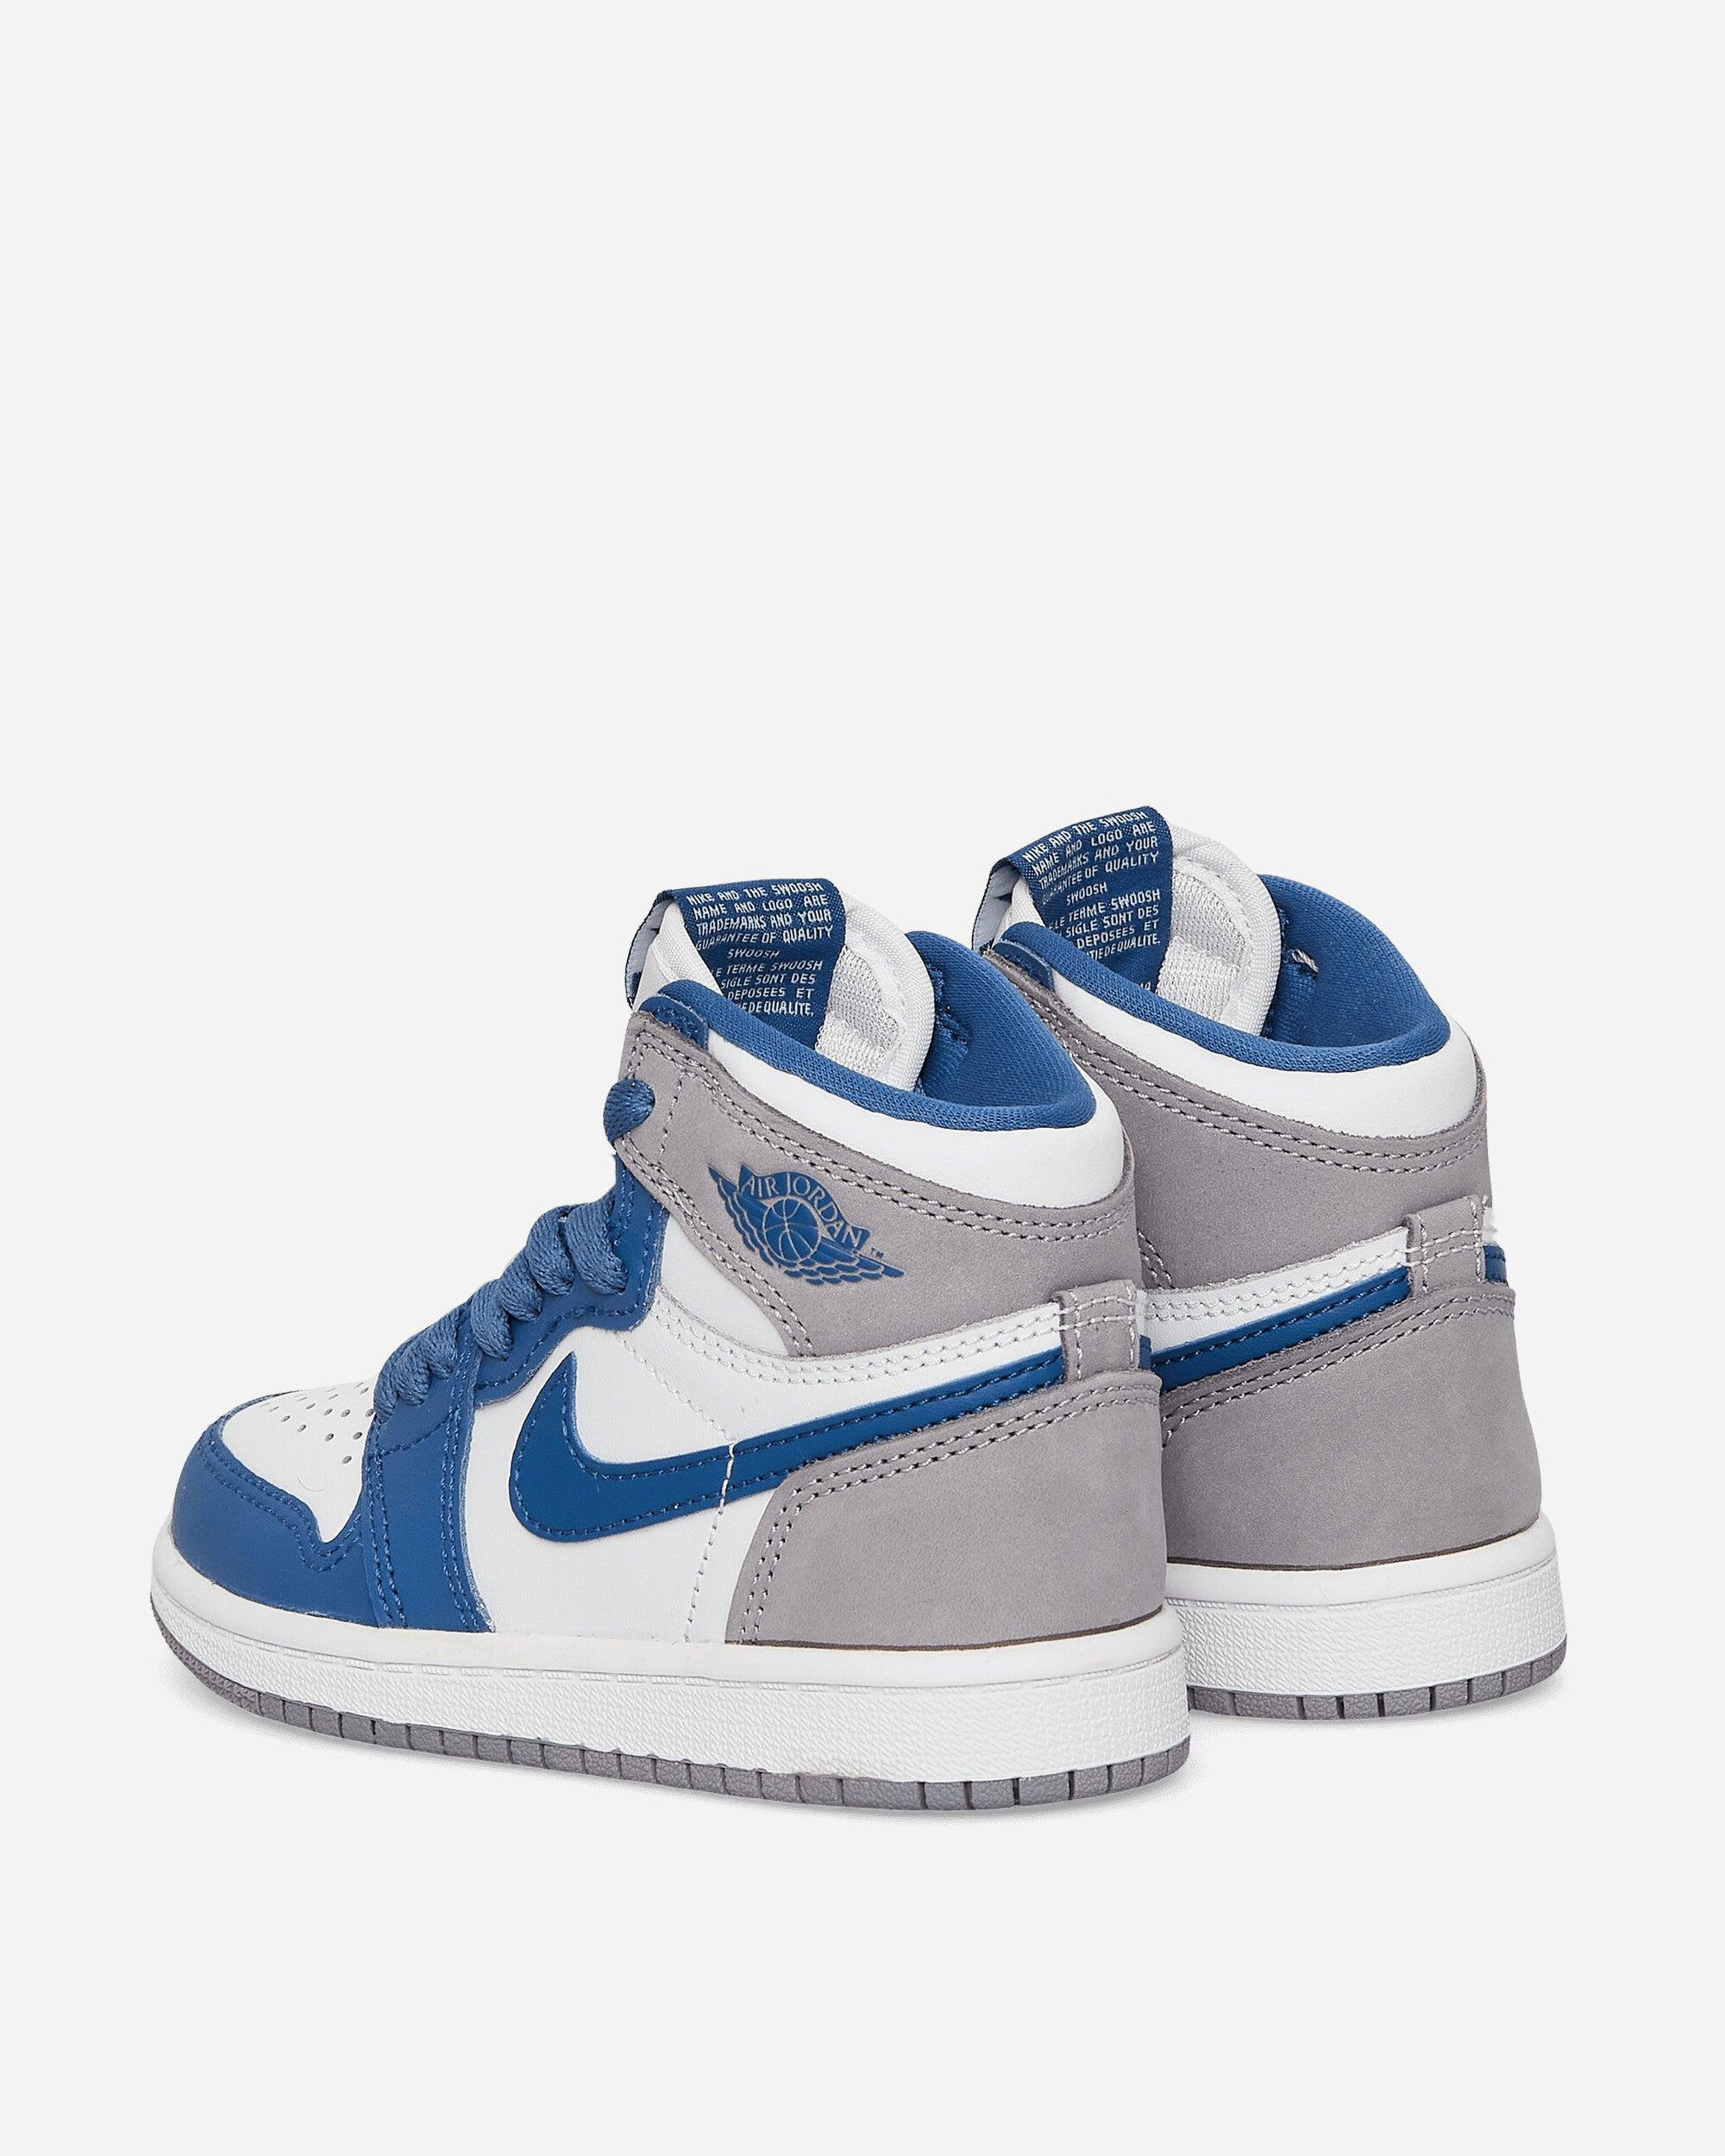 Nike Air Jordan 1 High Leather High-top Trainers in Blue | Lyst